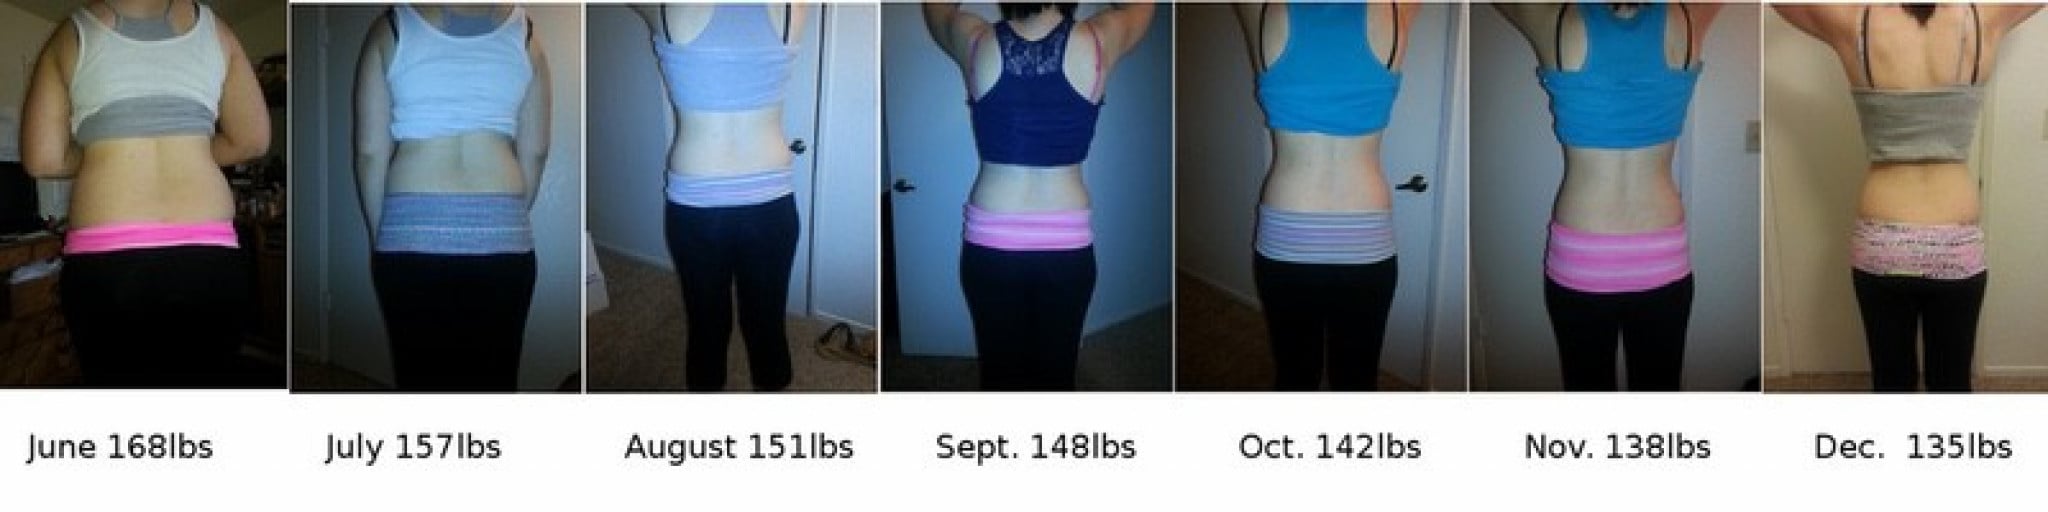 A photo of a 5'6" woman showing a weight reduction from 175 pounds to 135 pounds. A net loss of 40 pounds.